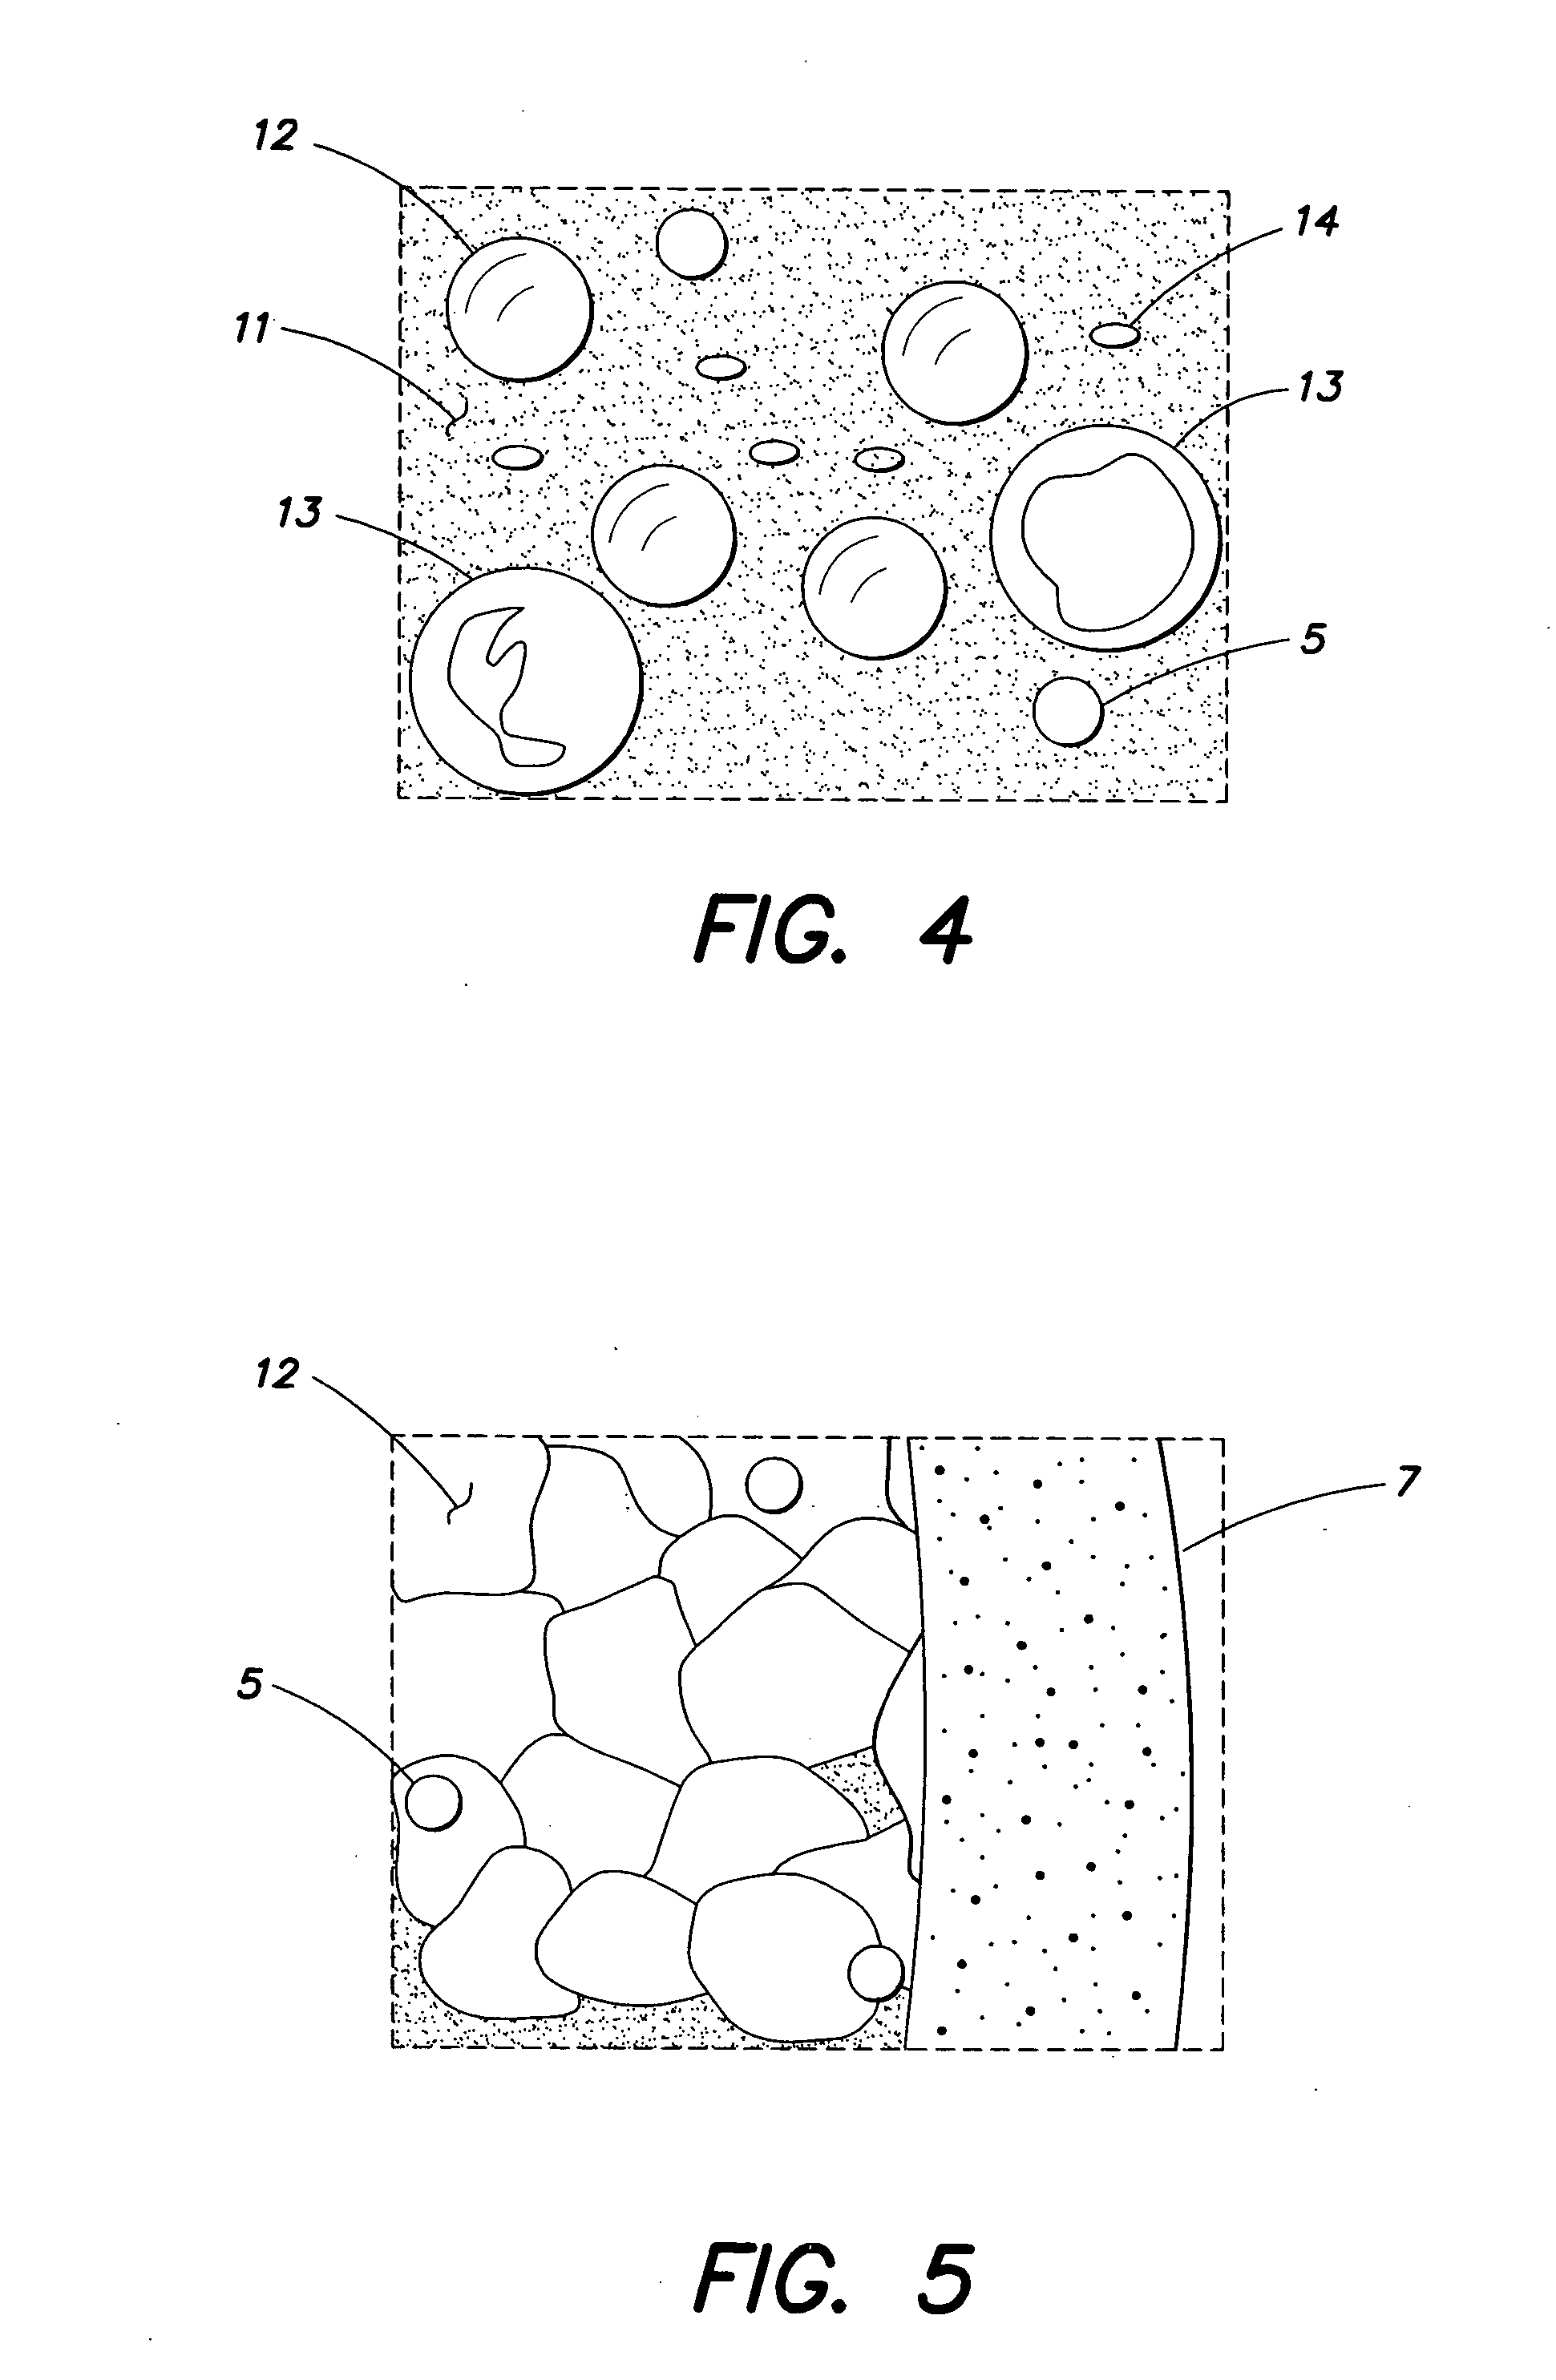 Apparatus and method for performing counts within a biologic fluid sample